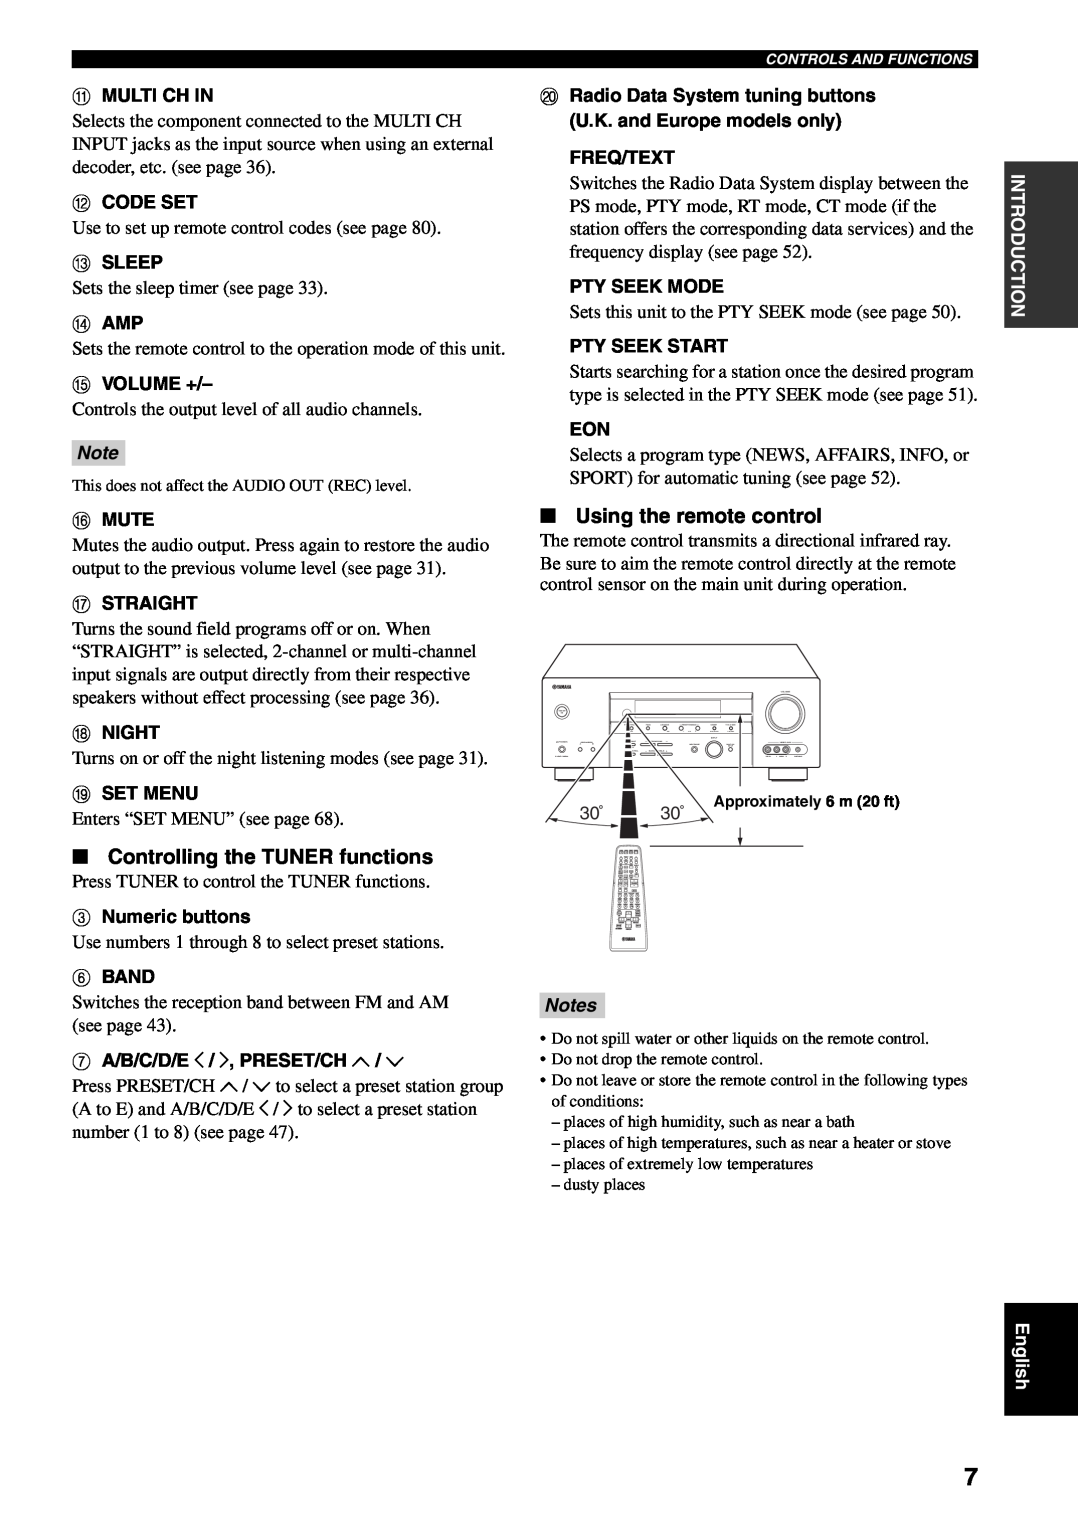 Yamaha RX-V459 owner manual Using the remote control, Controlling the TUNER functions, Notes 